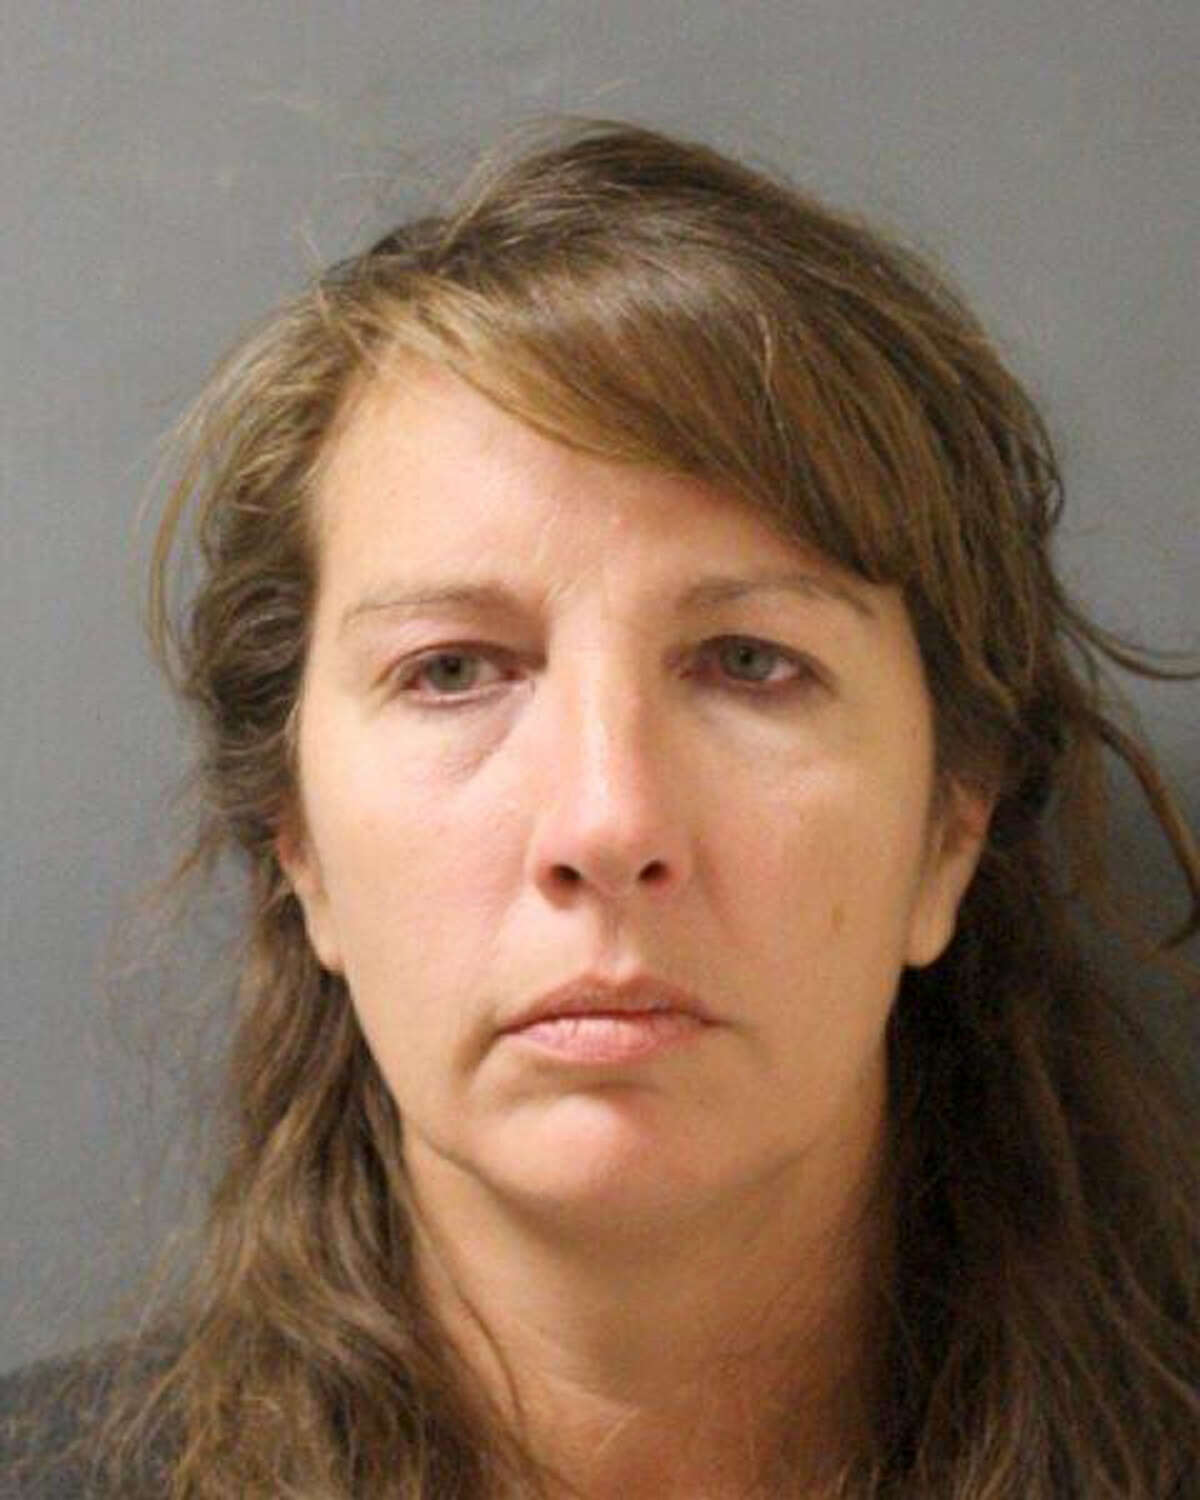 This undated photo provided by the Harris County Sheriff's Office shows the booking photo of Houston-area sheriff's deputy Chauna Thompson. The Harris County sheriff's office said Friday, June 9, 2017, that Thompson and her husband Terry Thompson have posted bail and that they have a court hearing scheduled for Tuesday, after they surrendered to authorities late Thursday after a grand jury that day handed up separate indictments against them. The Thompson's are accused of causing the May 28 death of 24-year-old John Hernandez outside a Houston-area restaurant. (Harris County Sheriff's Office via AP)